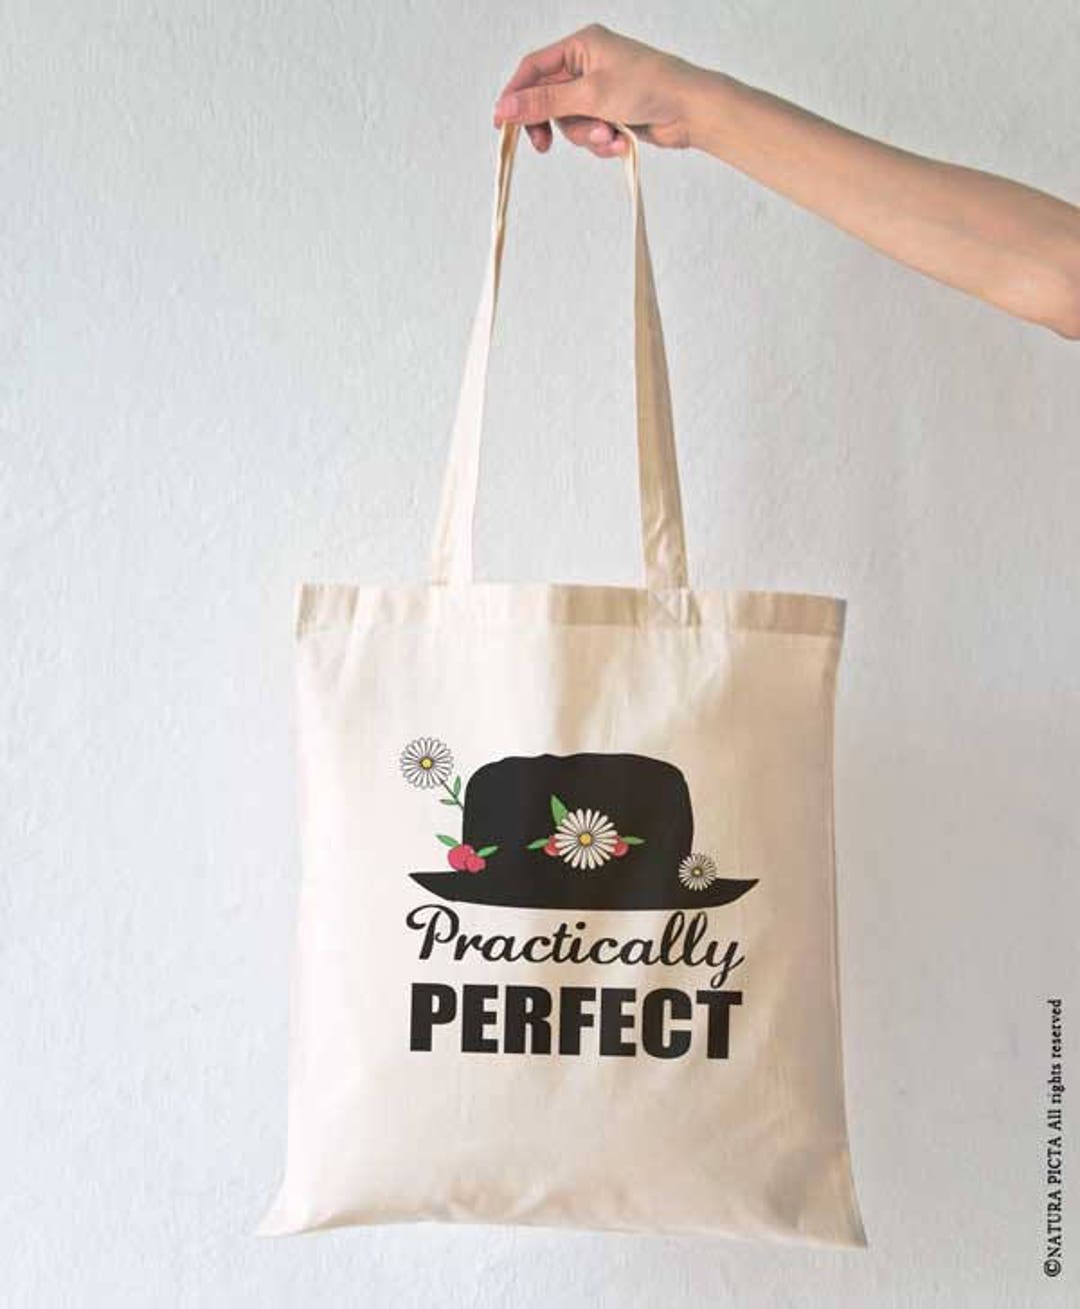 Practically Perfect Tote Bag-mary Poppins Tote Bag-cool Tote - Etsy